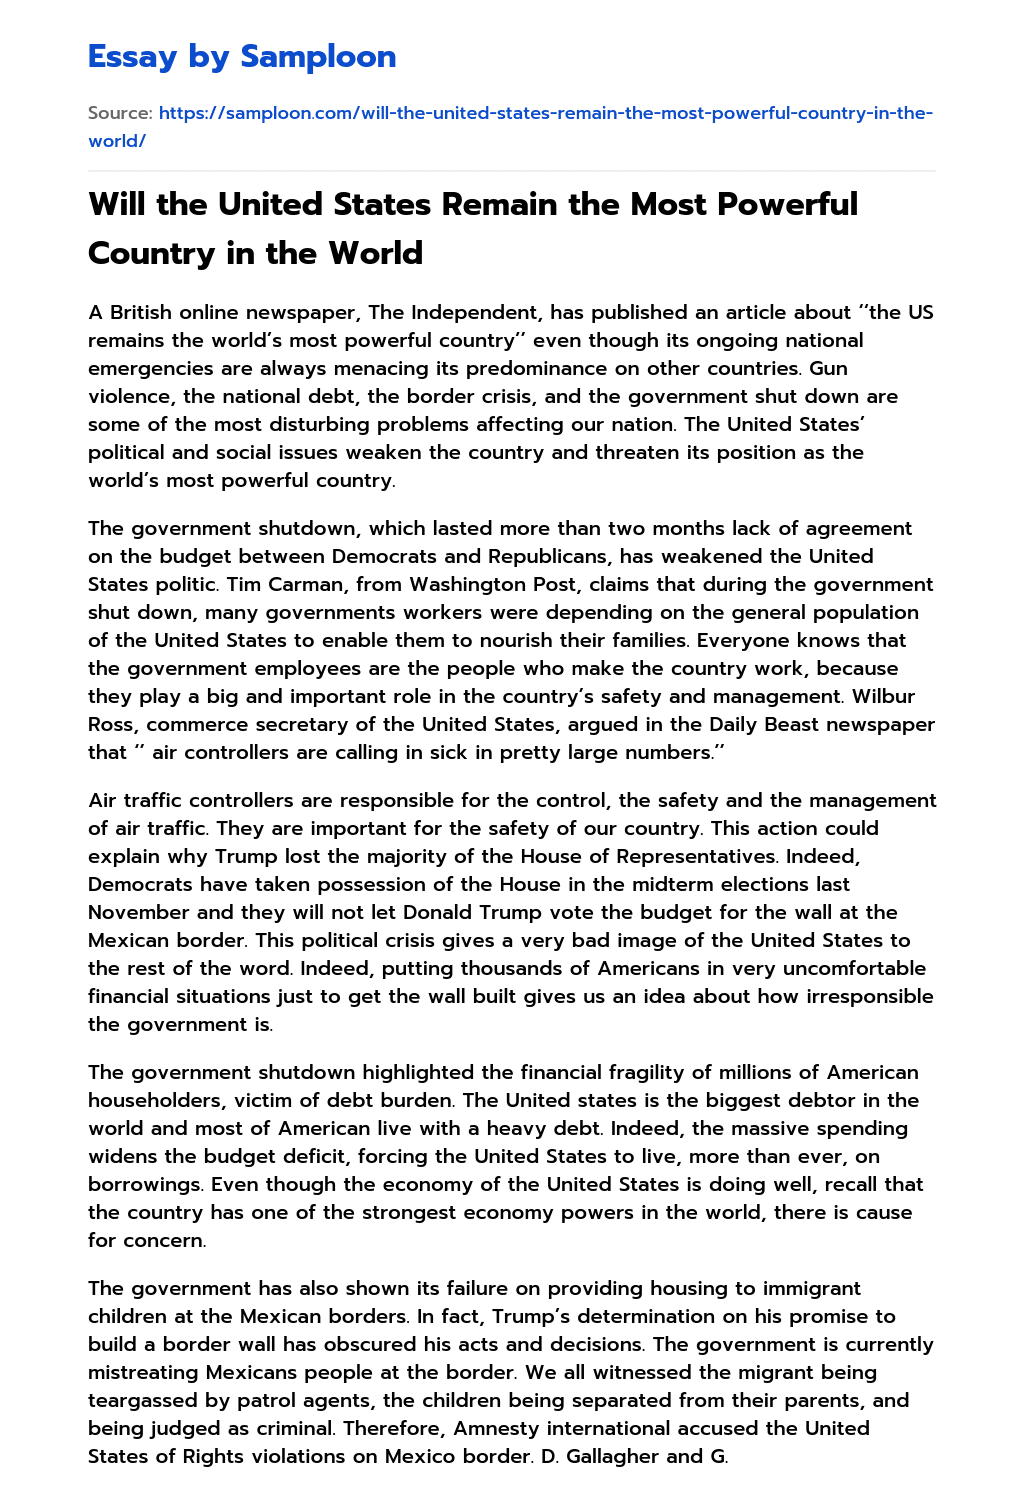 Will the United States Remain the Most Powerful Country in the World essay